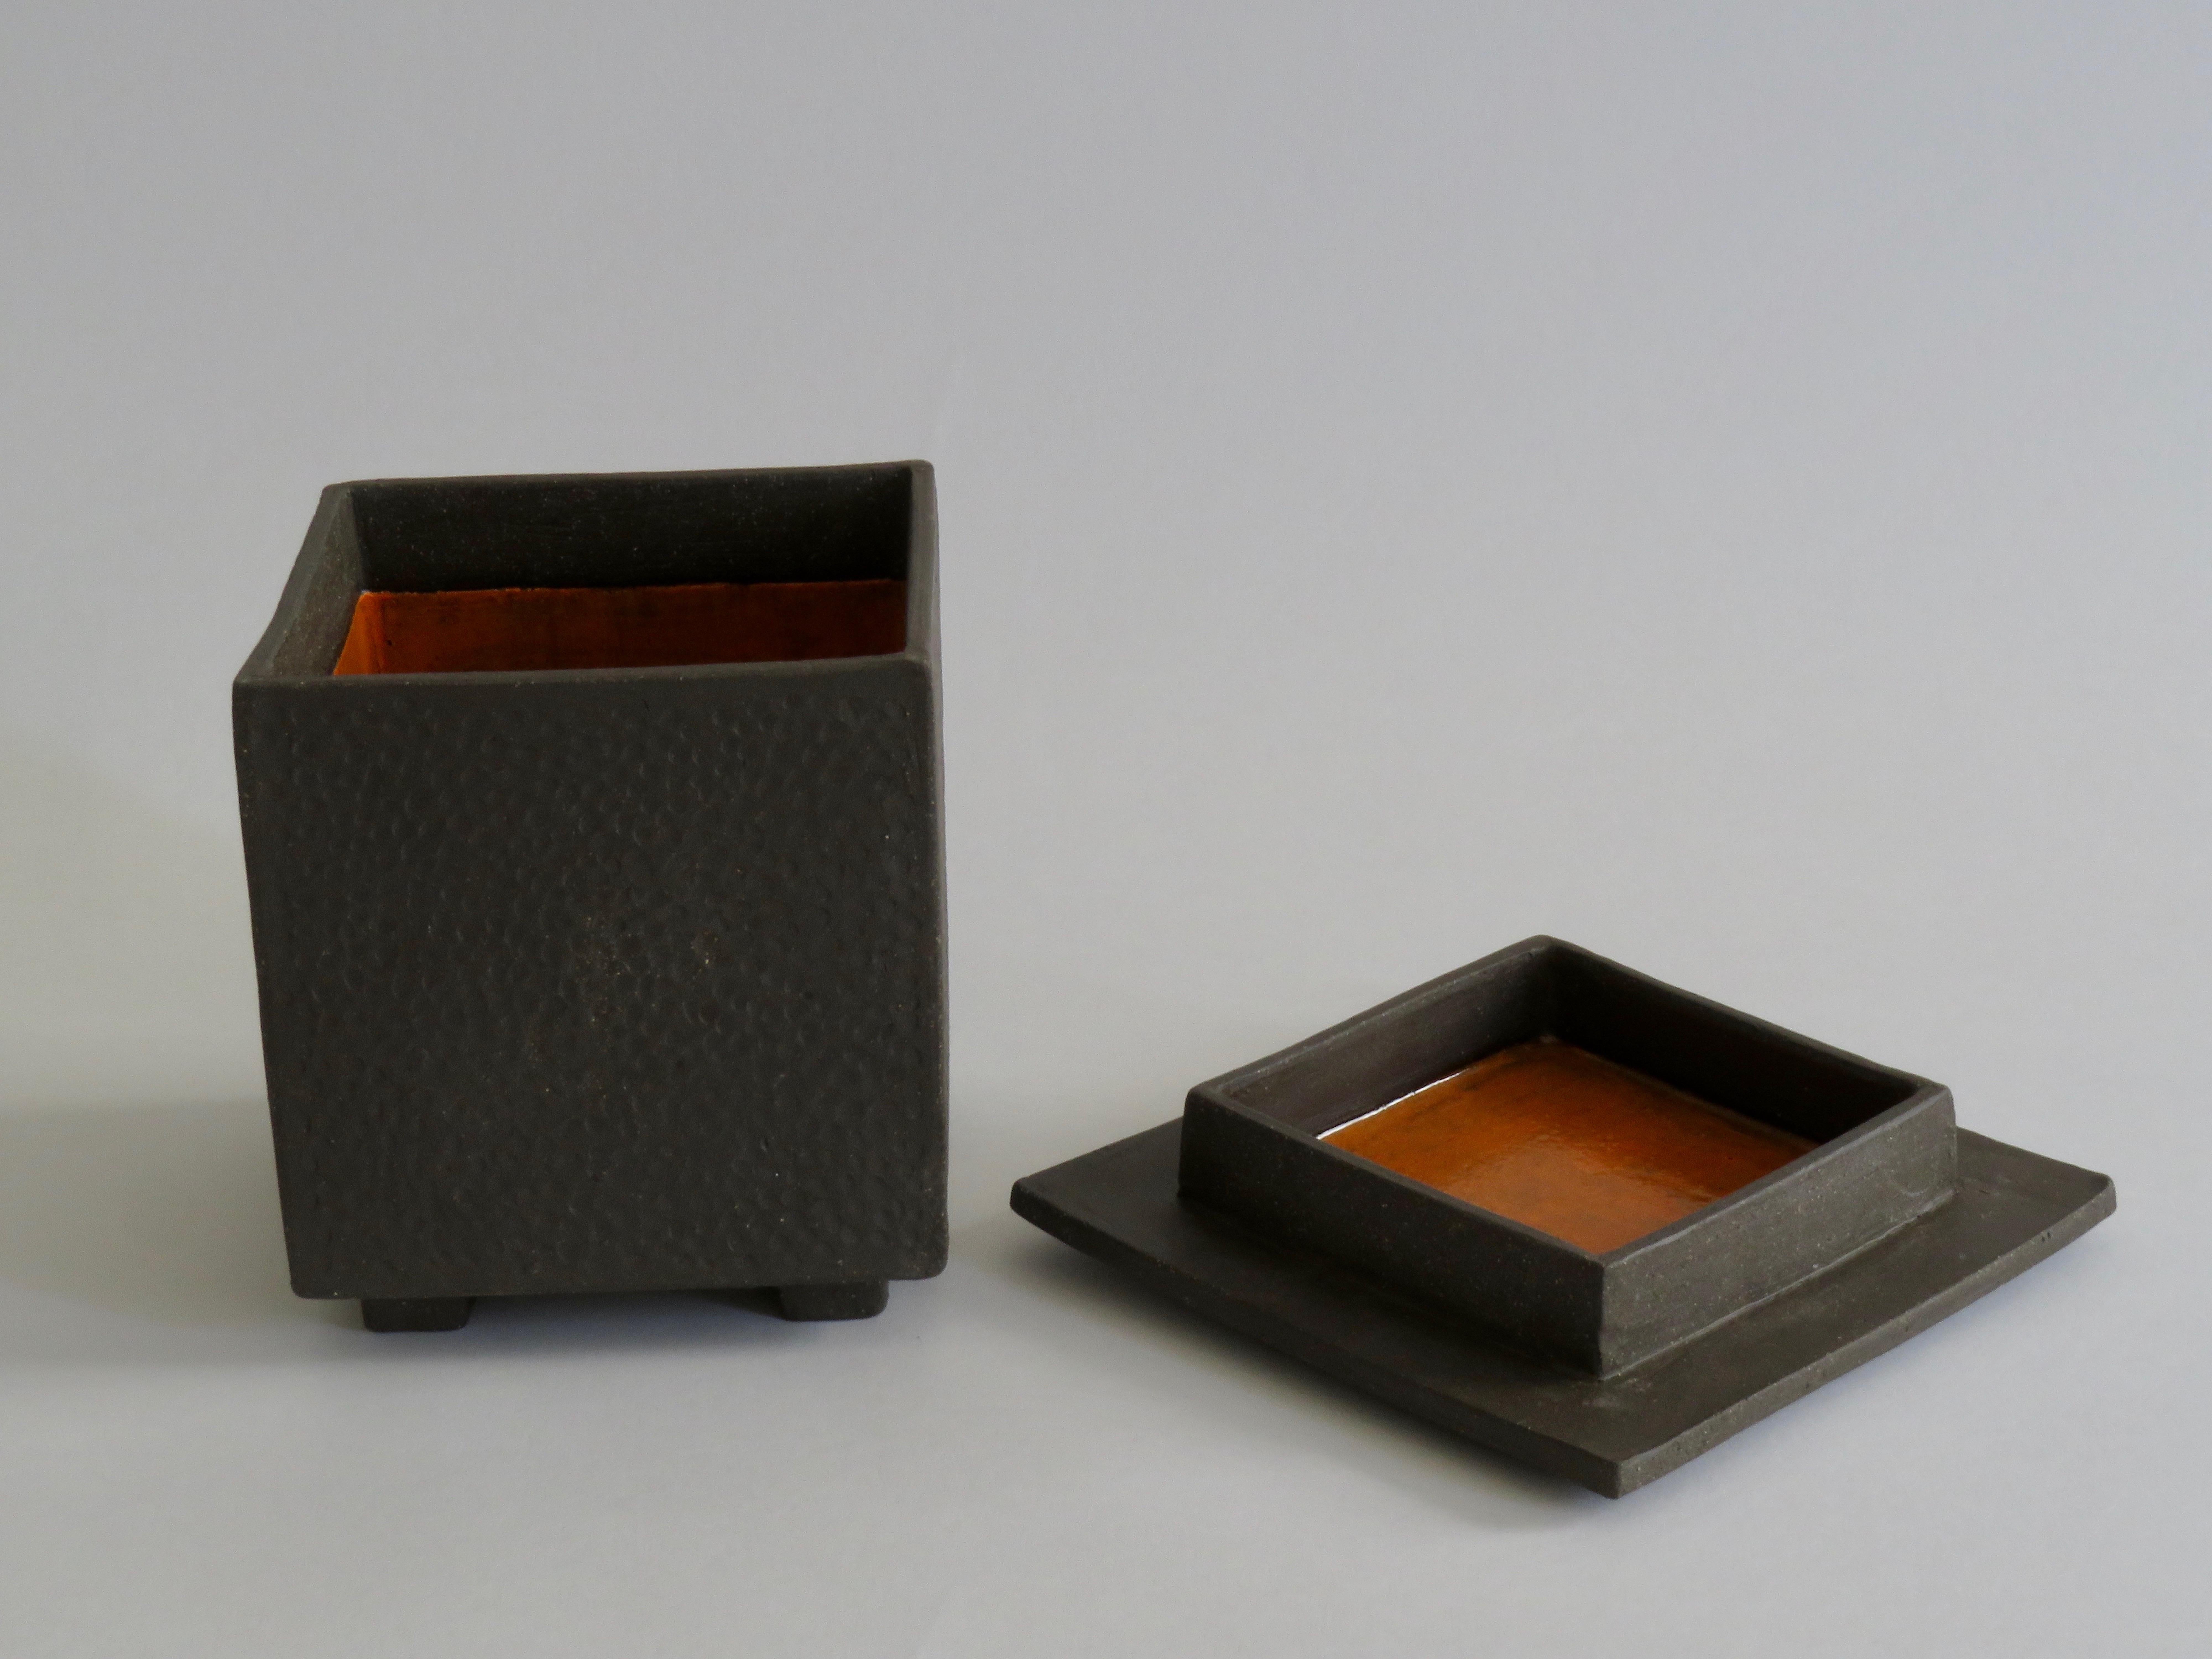 Hand built ceramic box. Subtly hand-textured clay box with a matching lid. The bare clay exterior highlights the handmade texture while an interior glaze surprises and shines. Very Japanese in design and attitude: quiet yet strong. Beautiful